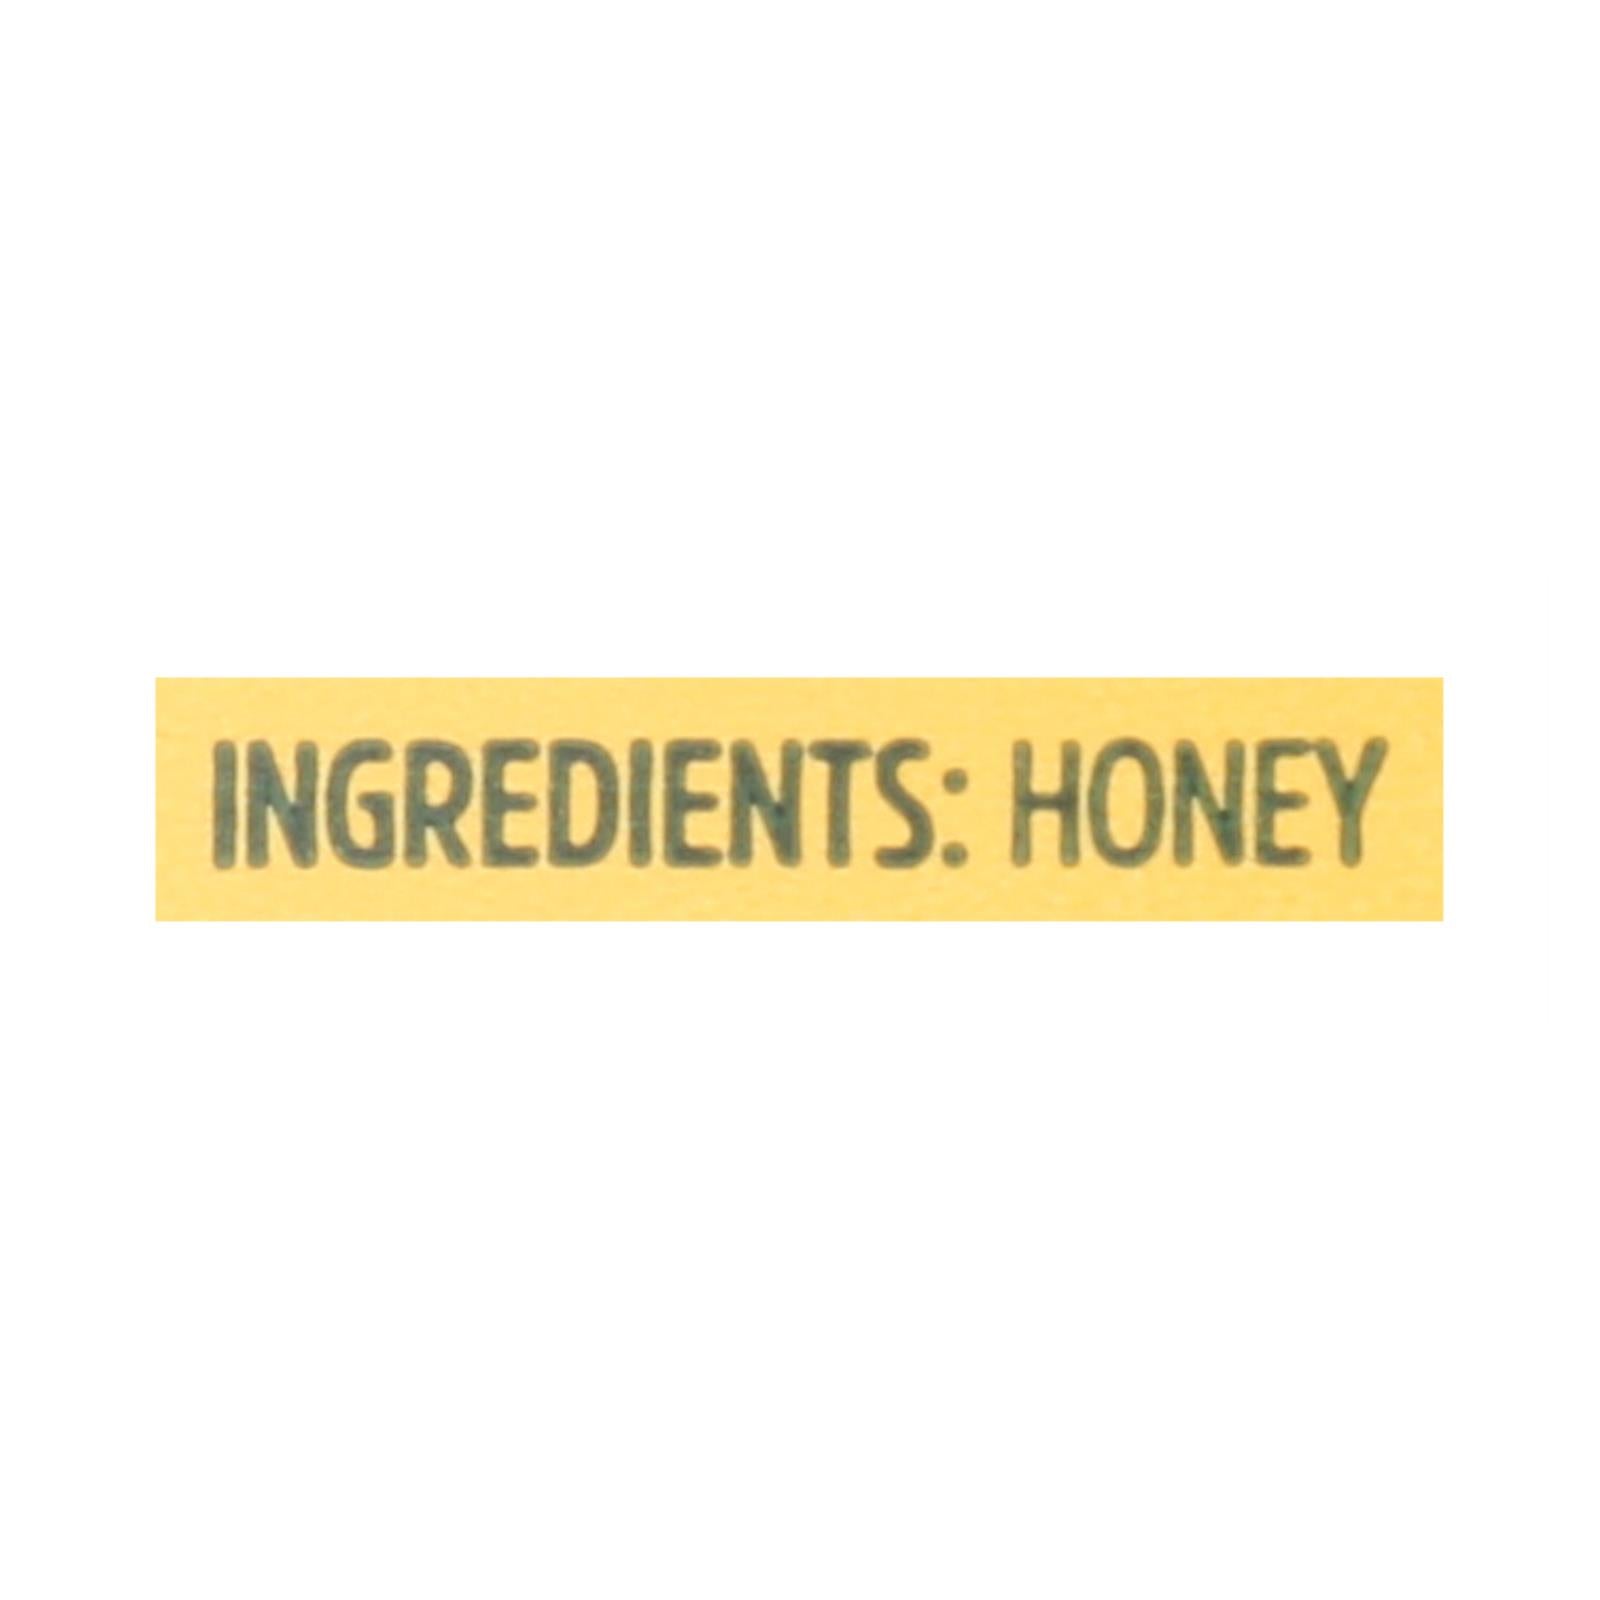 Local Hive Raw & Unfiltered Clover Honey - Case of 6 - 12 OZ